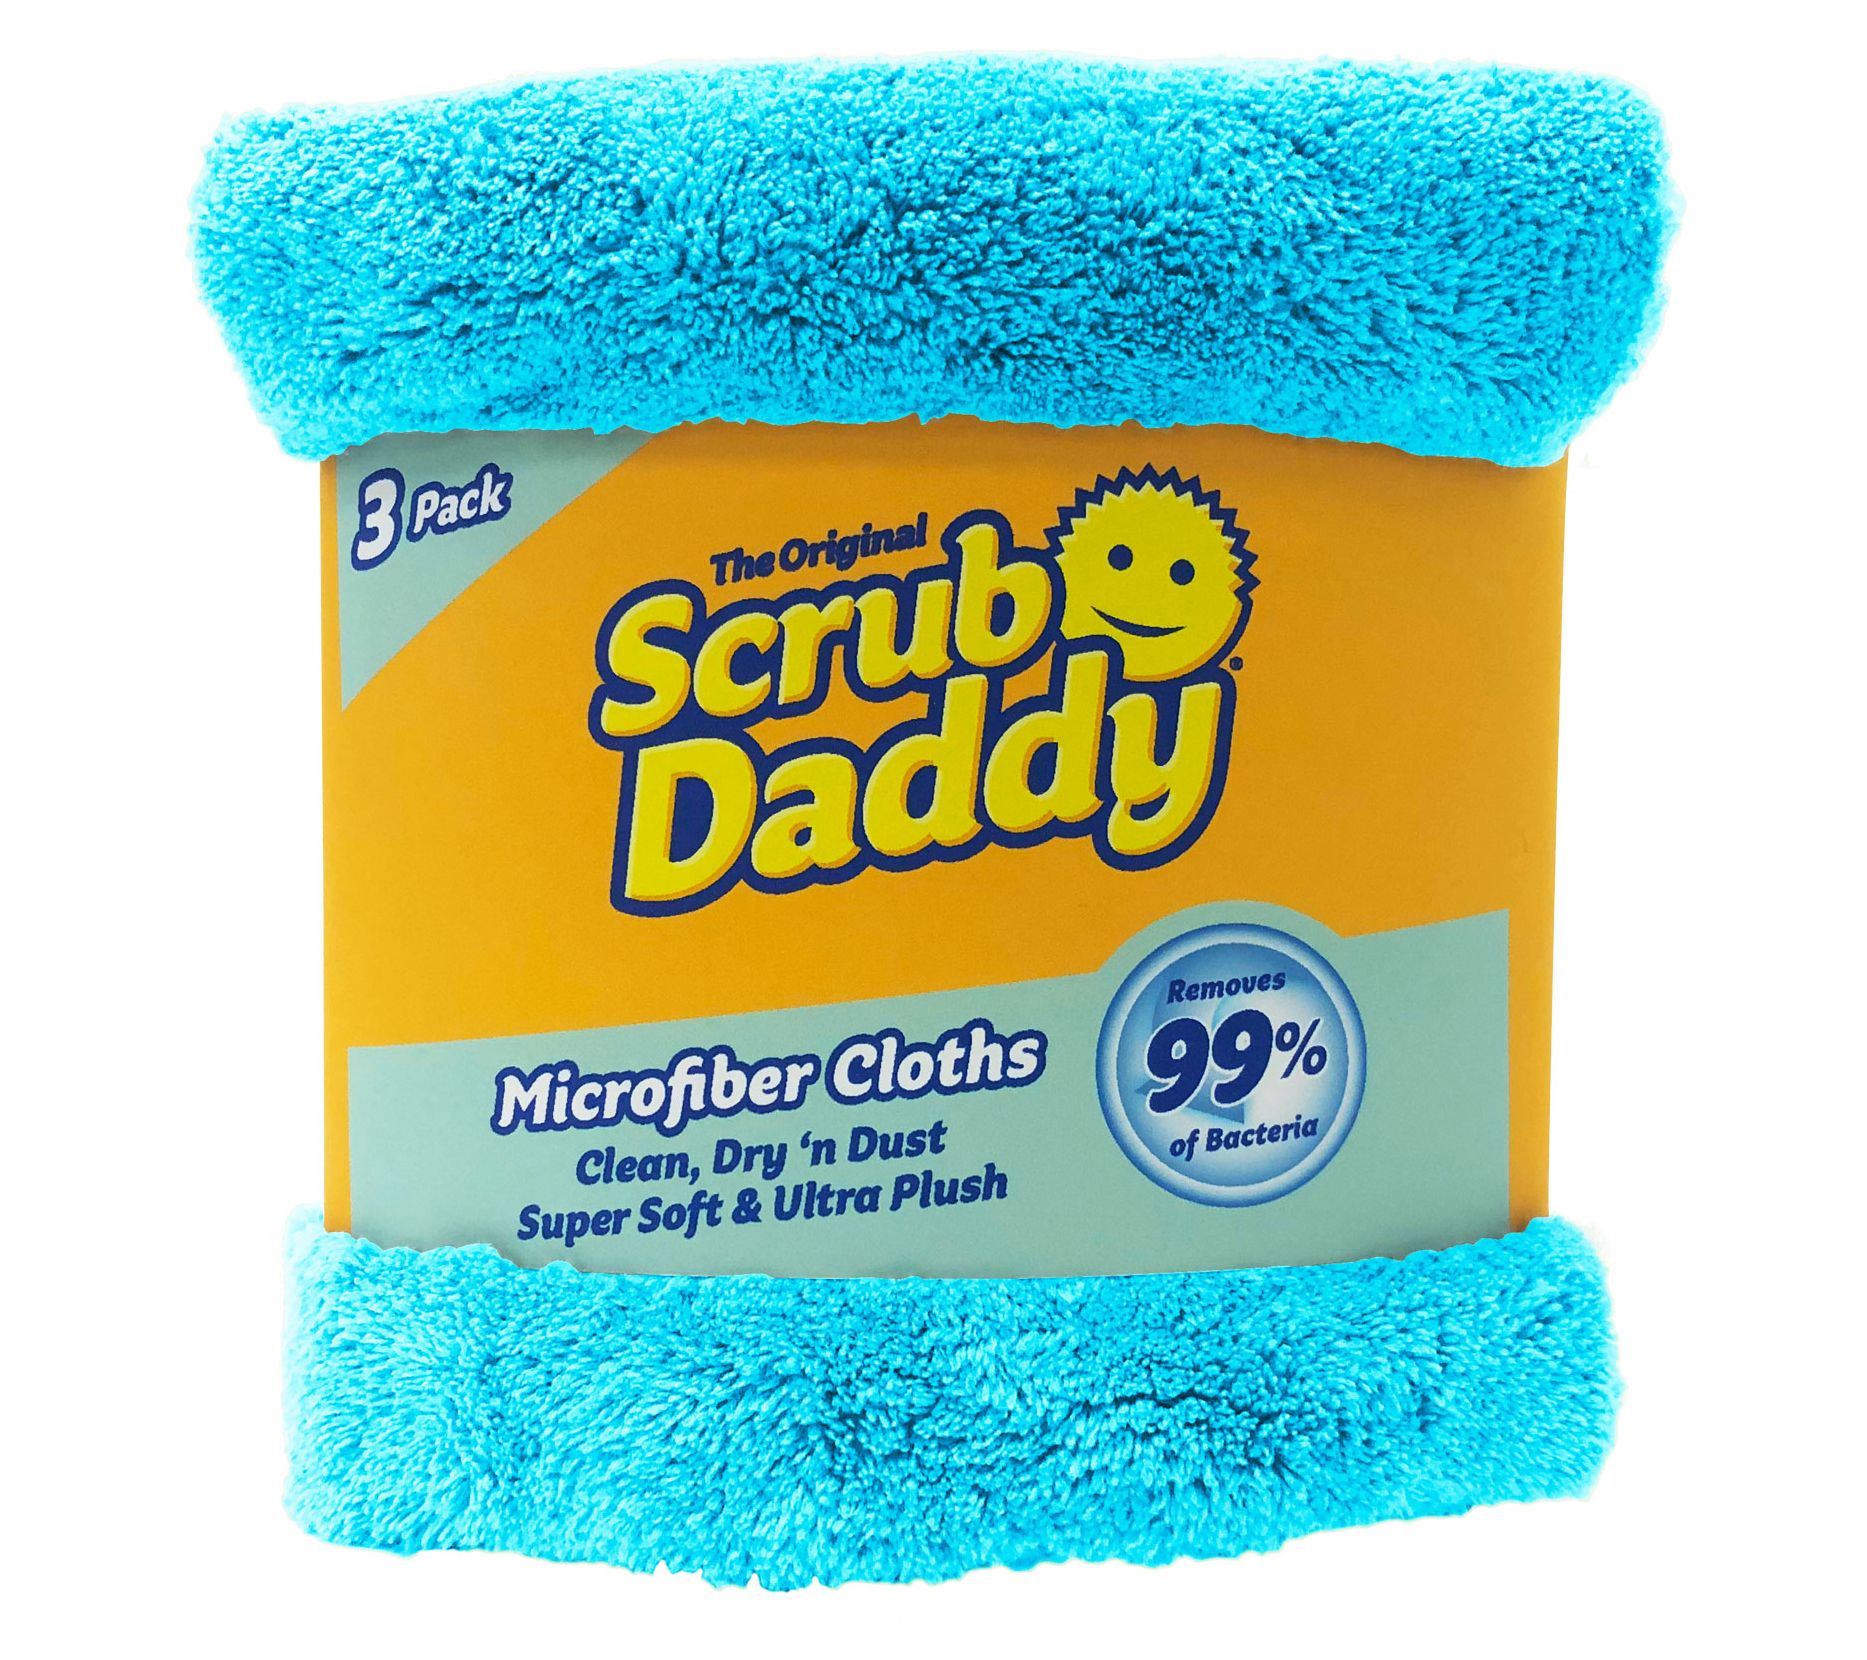 Special Edition Winter Shapes w/ MicroFiber Towels by Scrub Daddy 